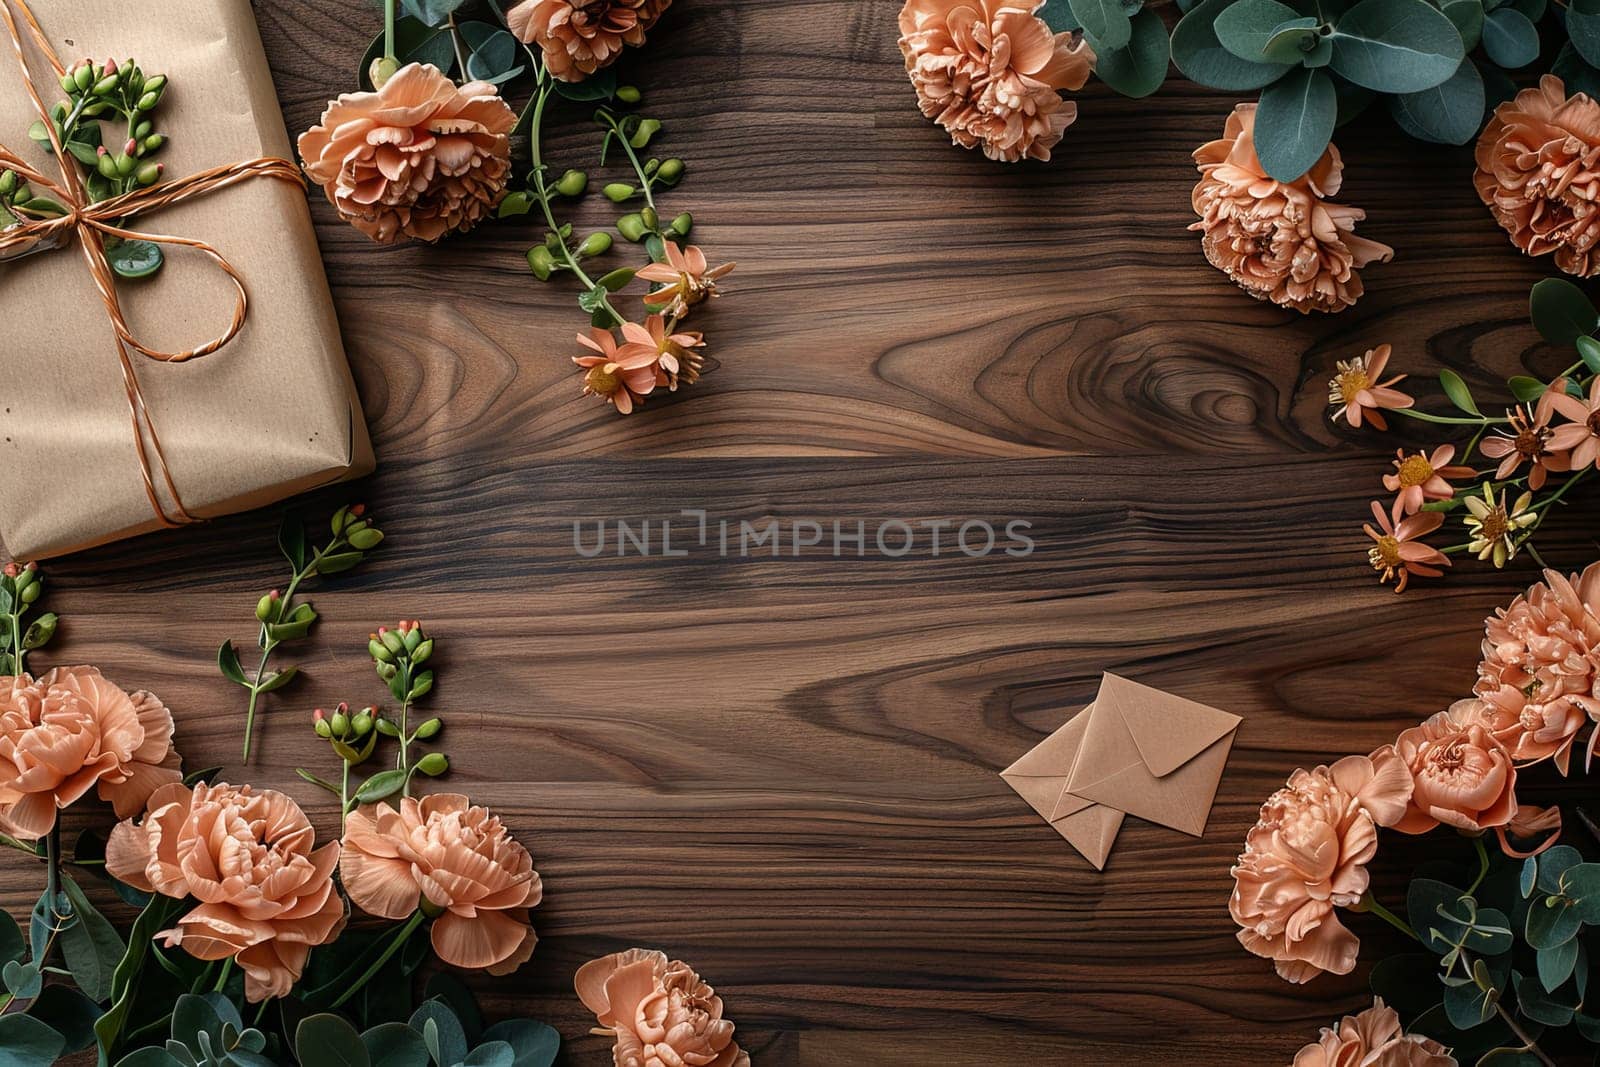 A wooden table with three brown boxes and a vase of pink flowers. Concept of warmth and celebration